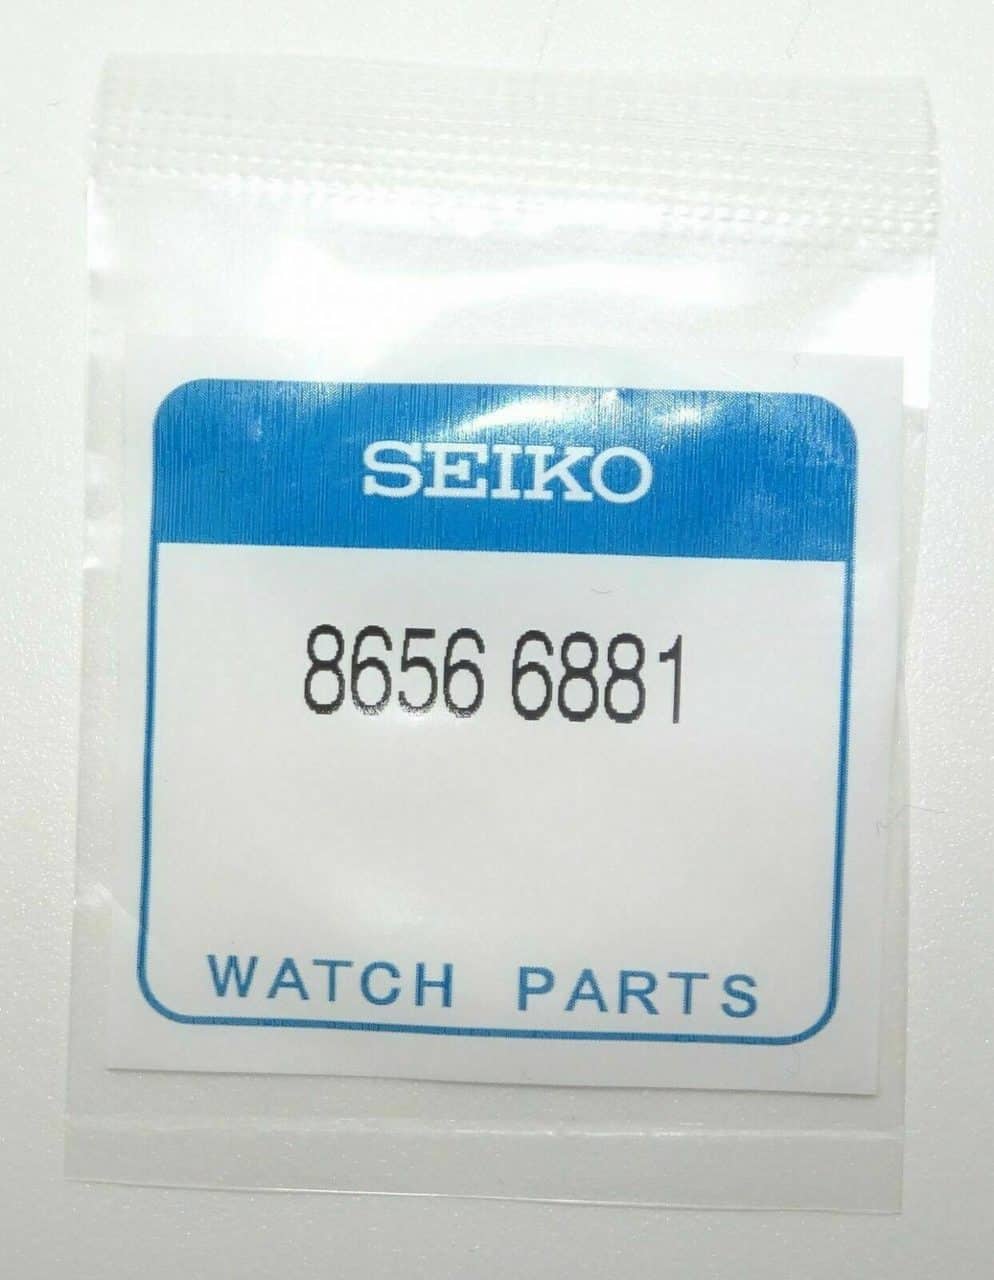 Seiko Gasket For Crystal For Seiko 7T32 7C60 7N33 0AB0 pn 86566881 192829164084 2